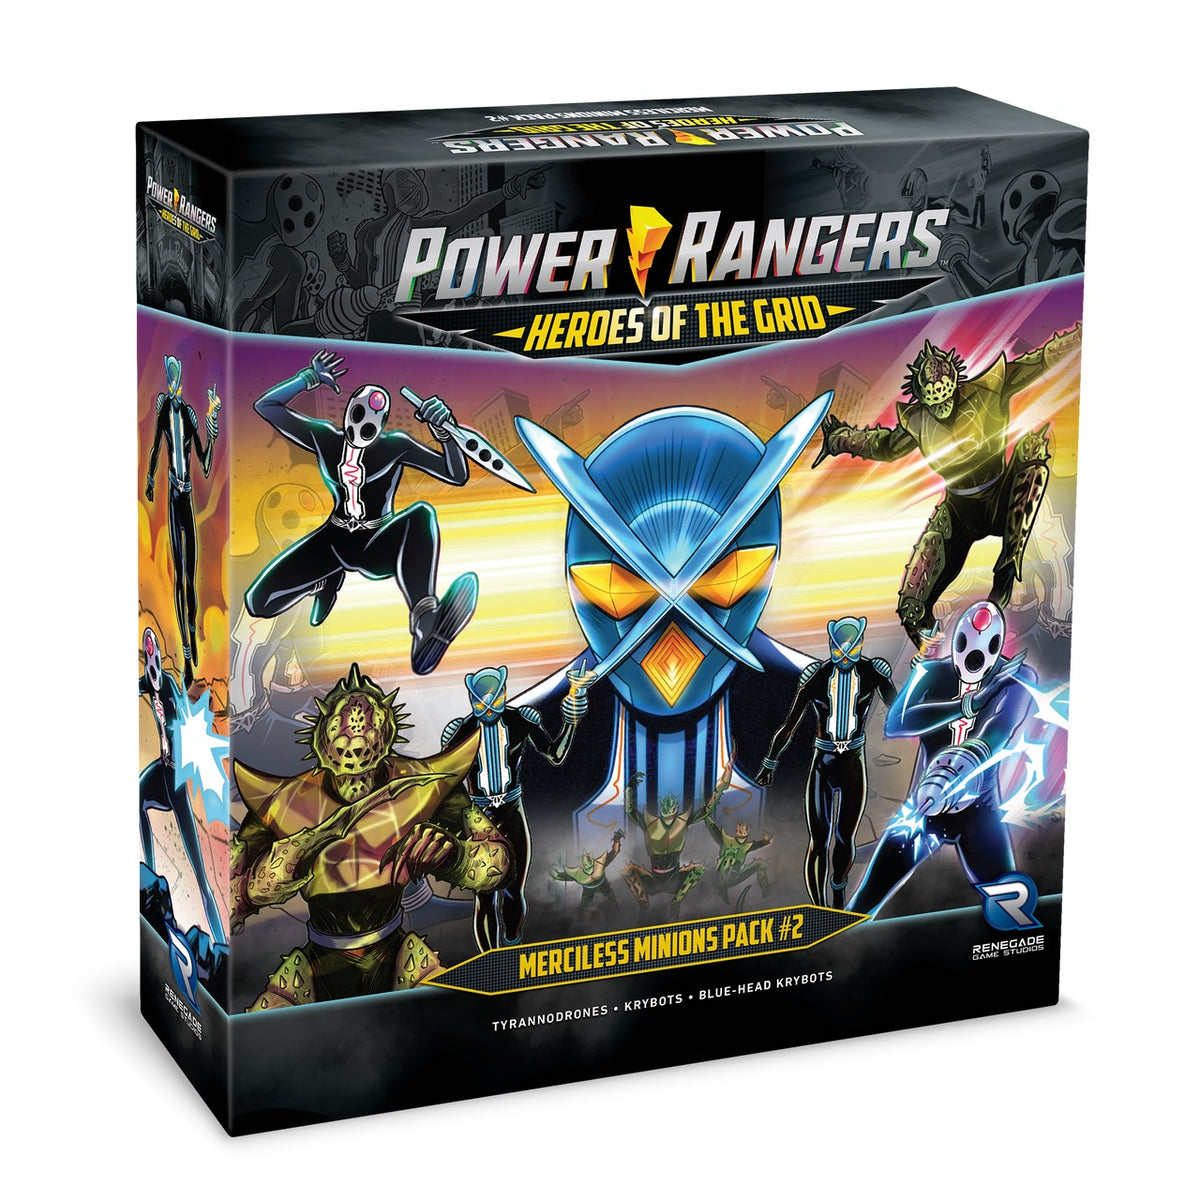 Power Rangers Heroes of the Grid Merciless Minions Pack No 2 (Preorder)